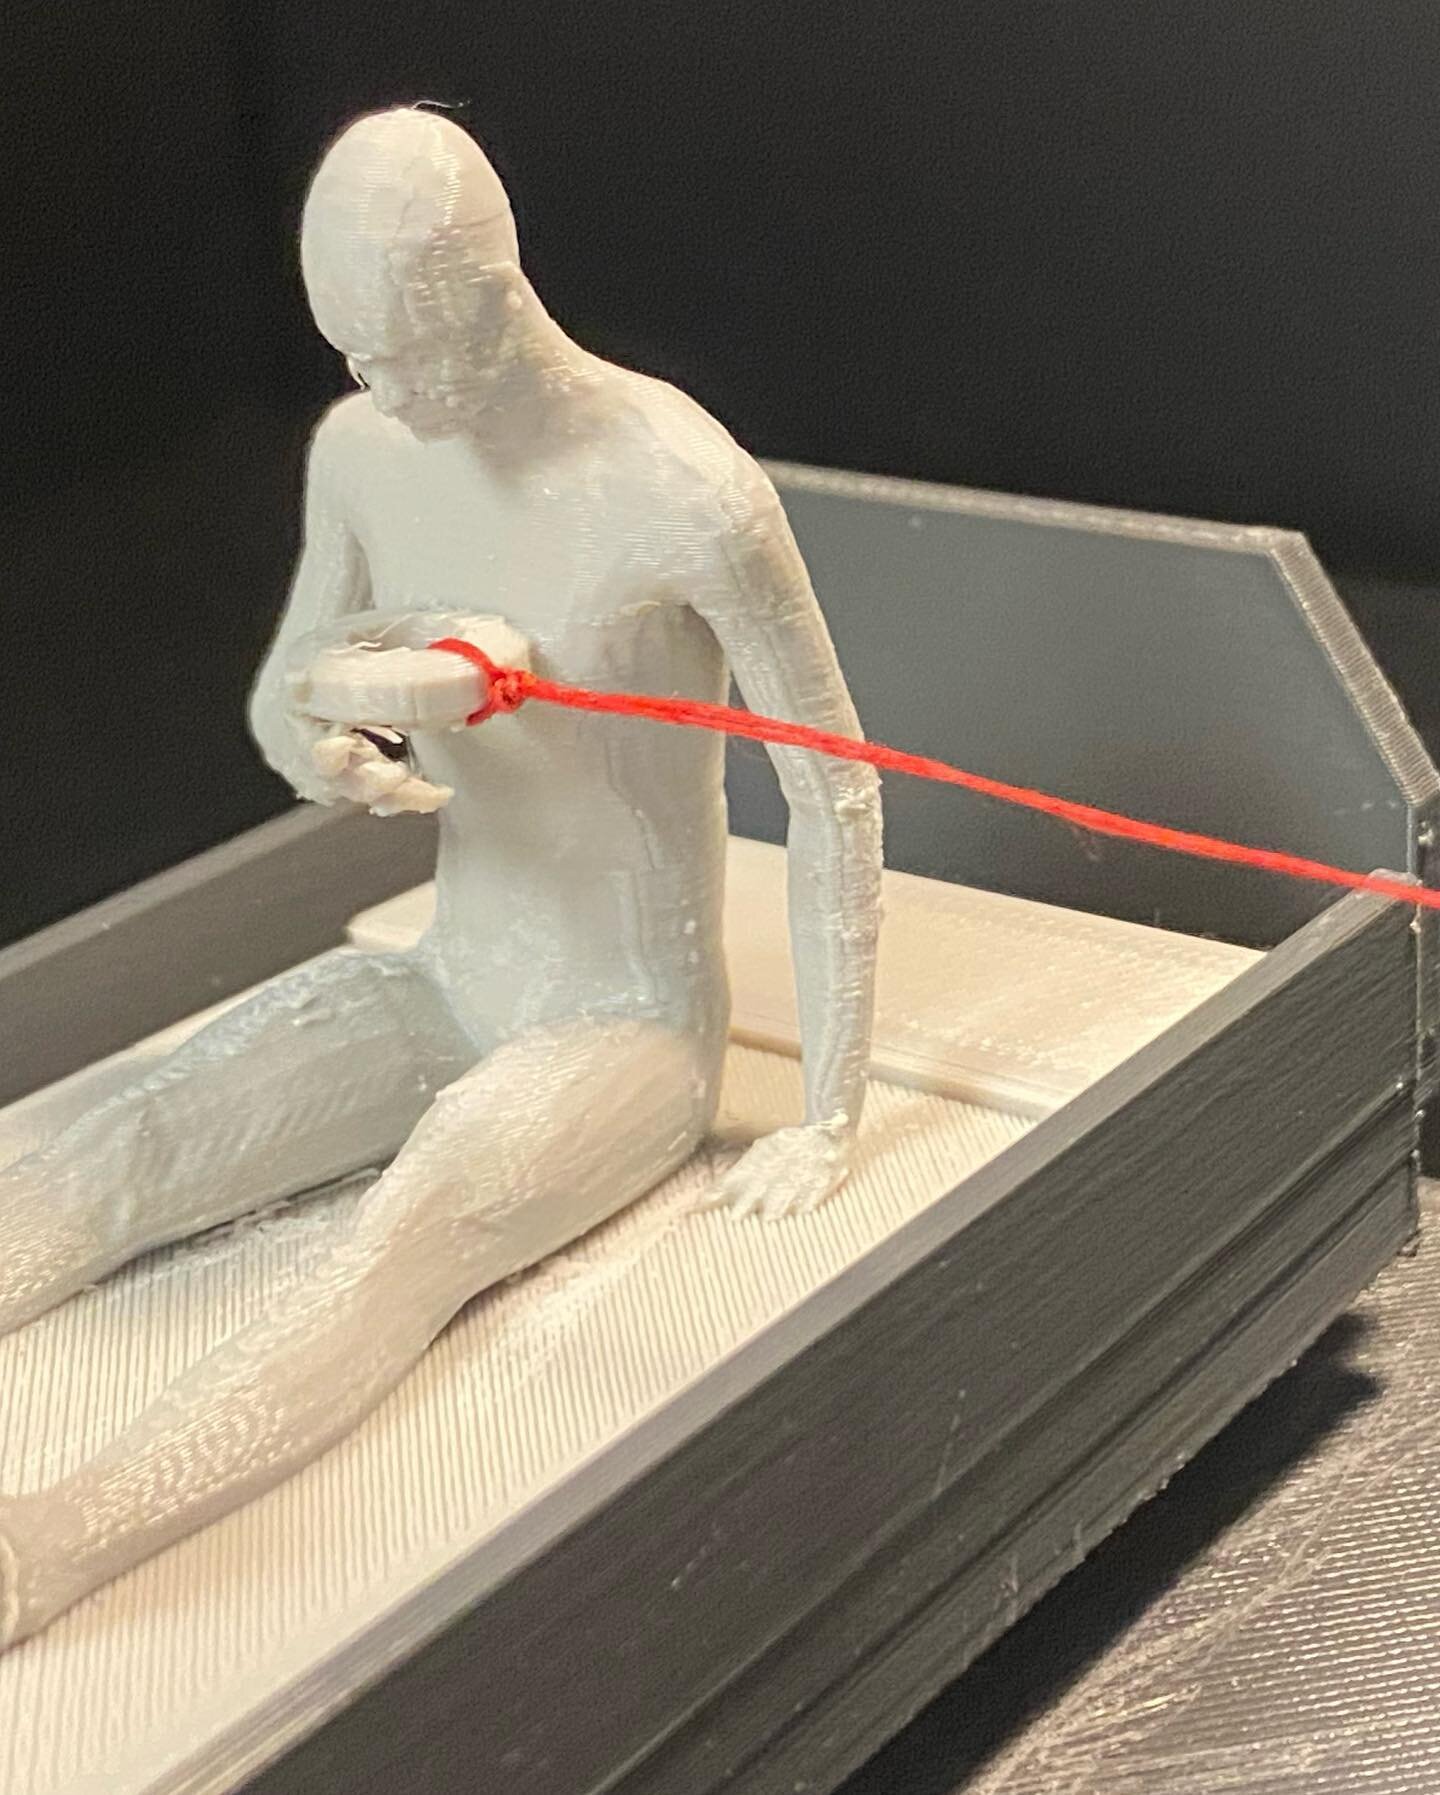 Sneak peak of a prototype for our upcoming 3D-printable thought experiment: the Famous Violinist (h/t Judy Thomson). 

Files will go up (and, as always, will be available for free) next week.